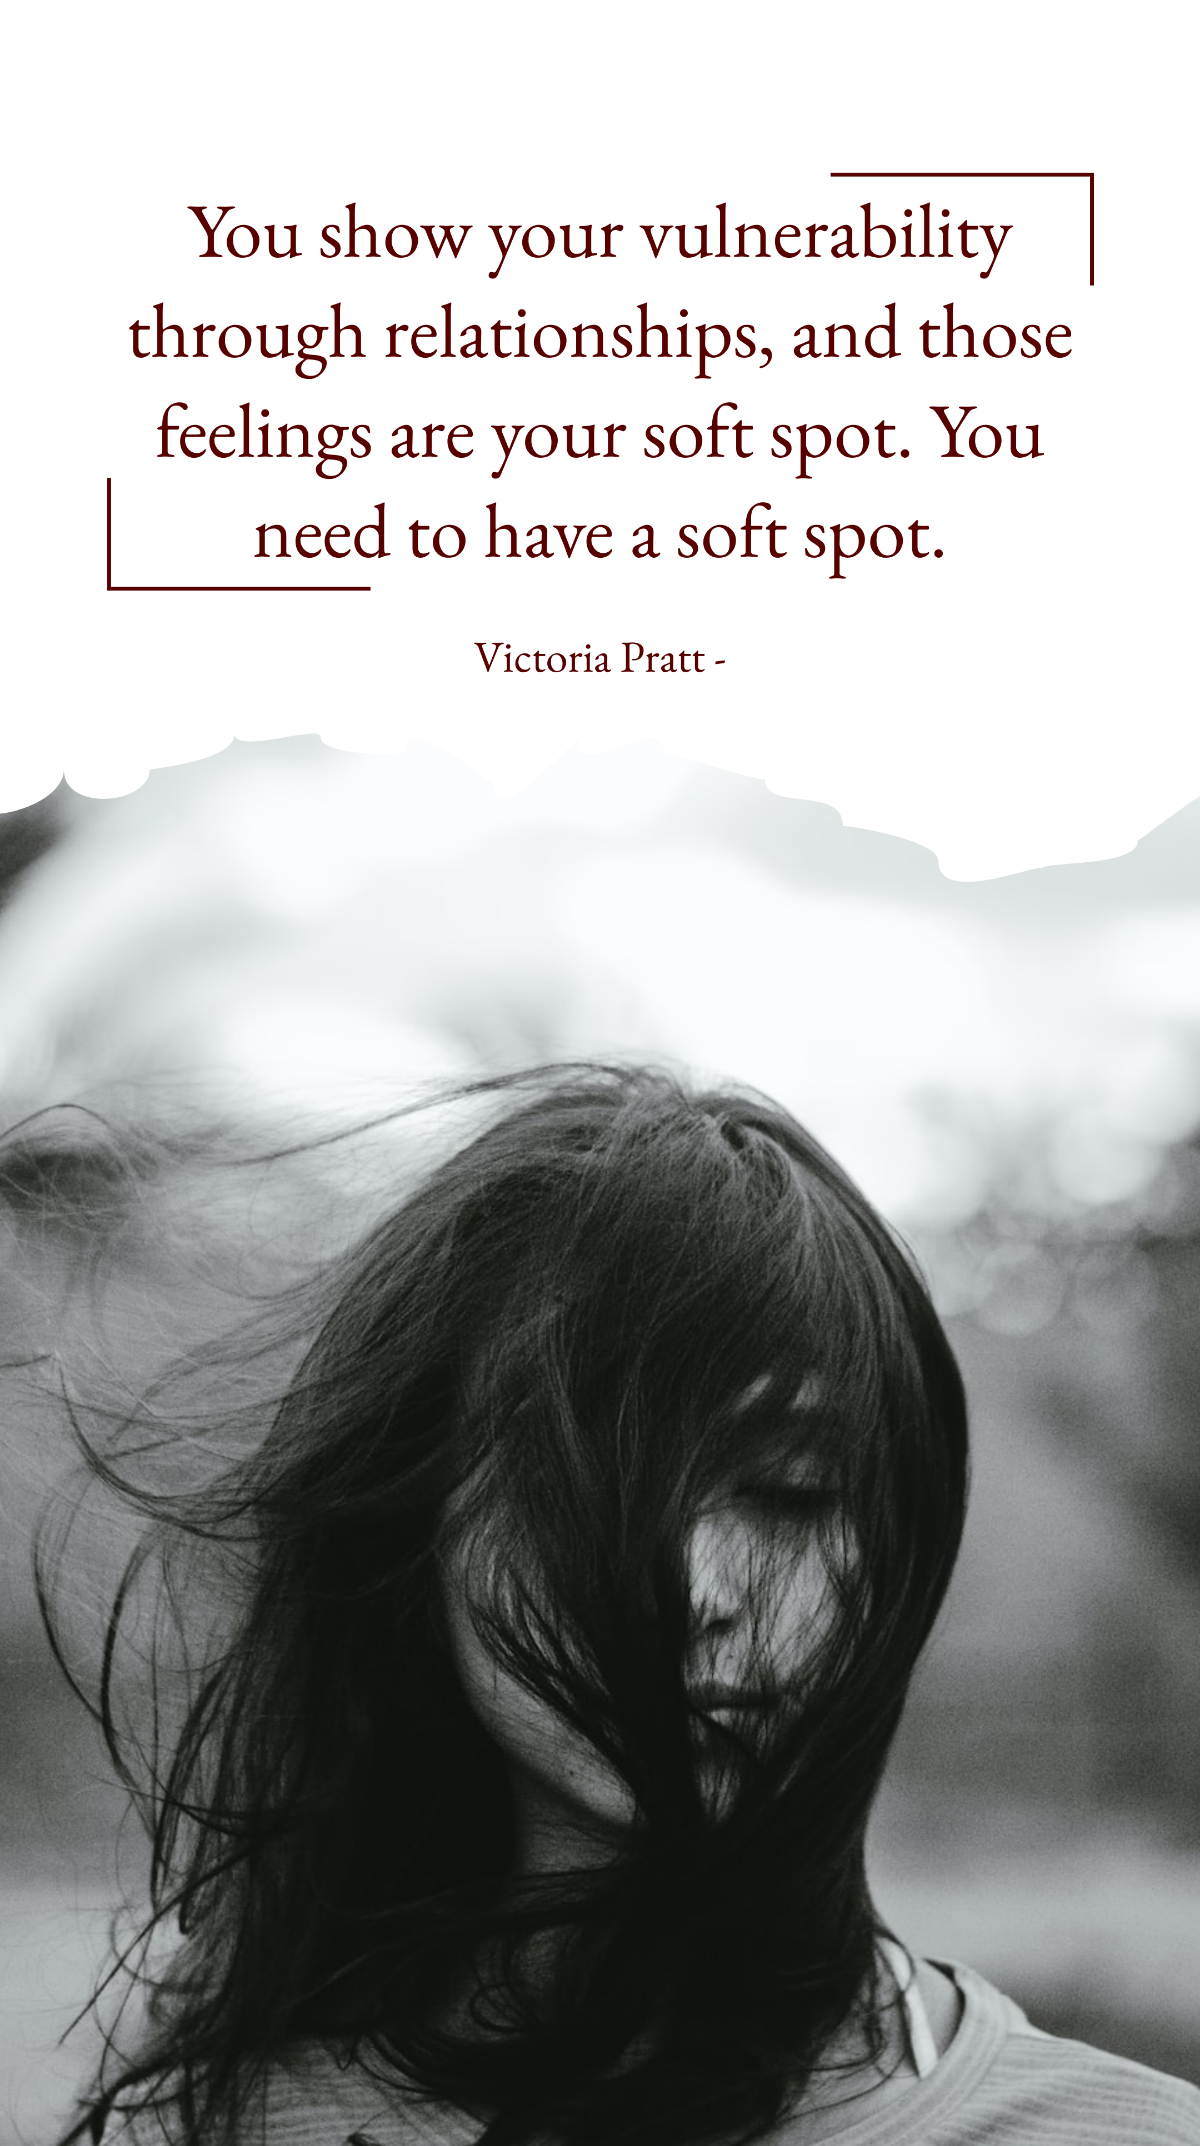 Victoria Pratt - You show your vulnerability through relationships, and those feelings are your soft spot. You need to have a soft spot. Template